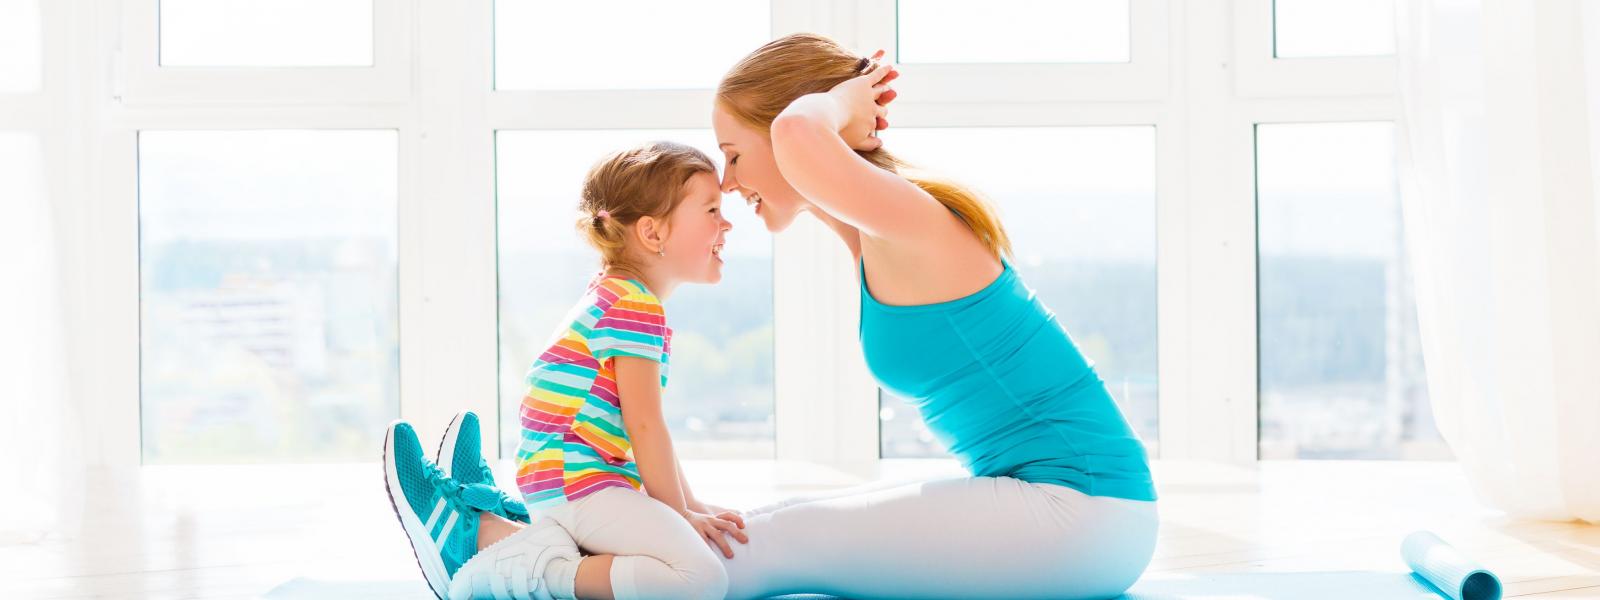 Woman doing exercise with her child watching